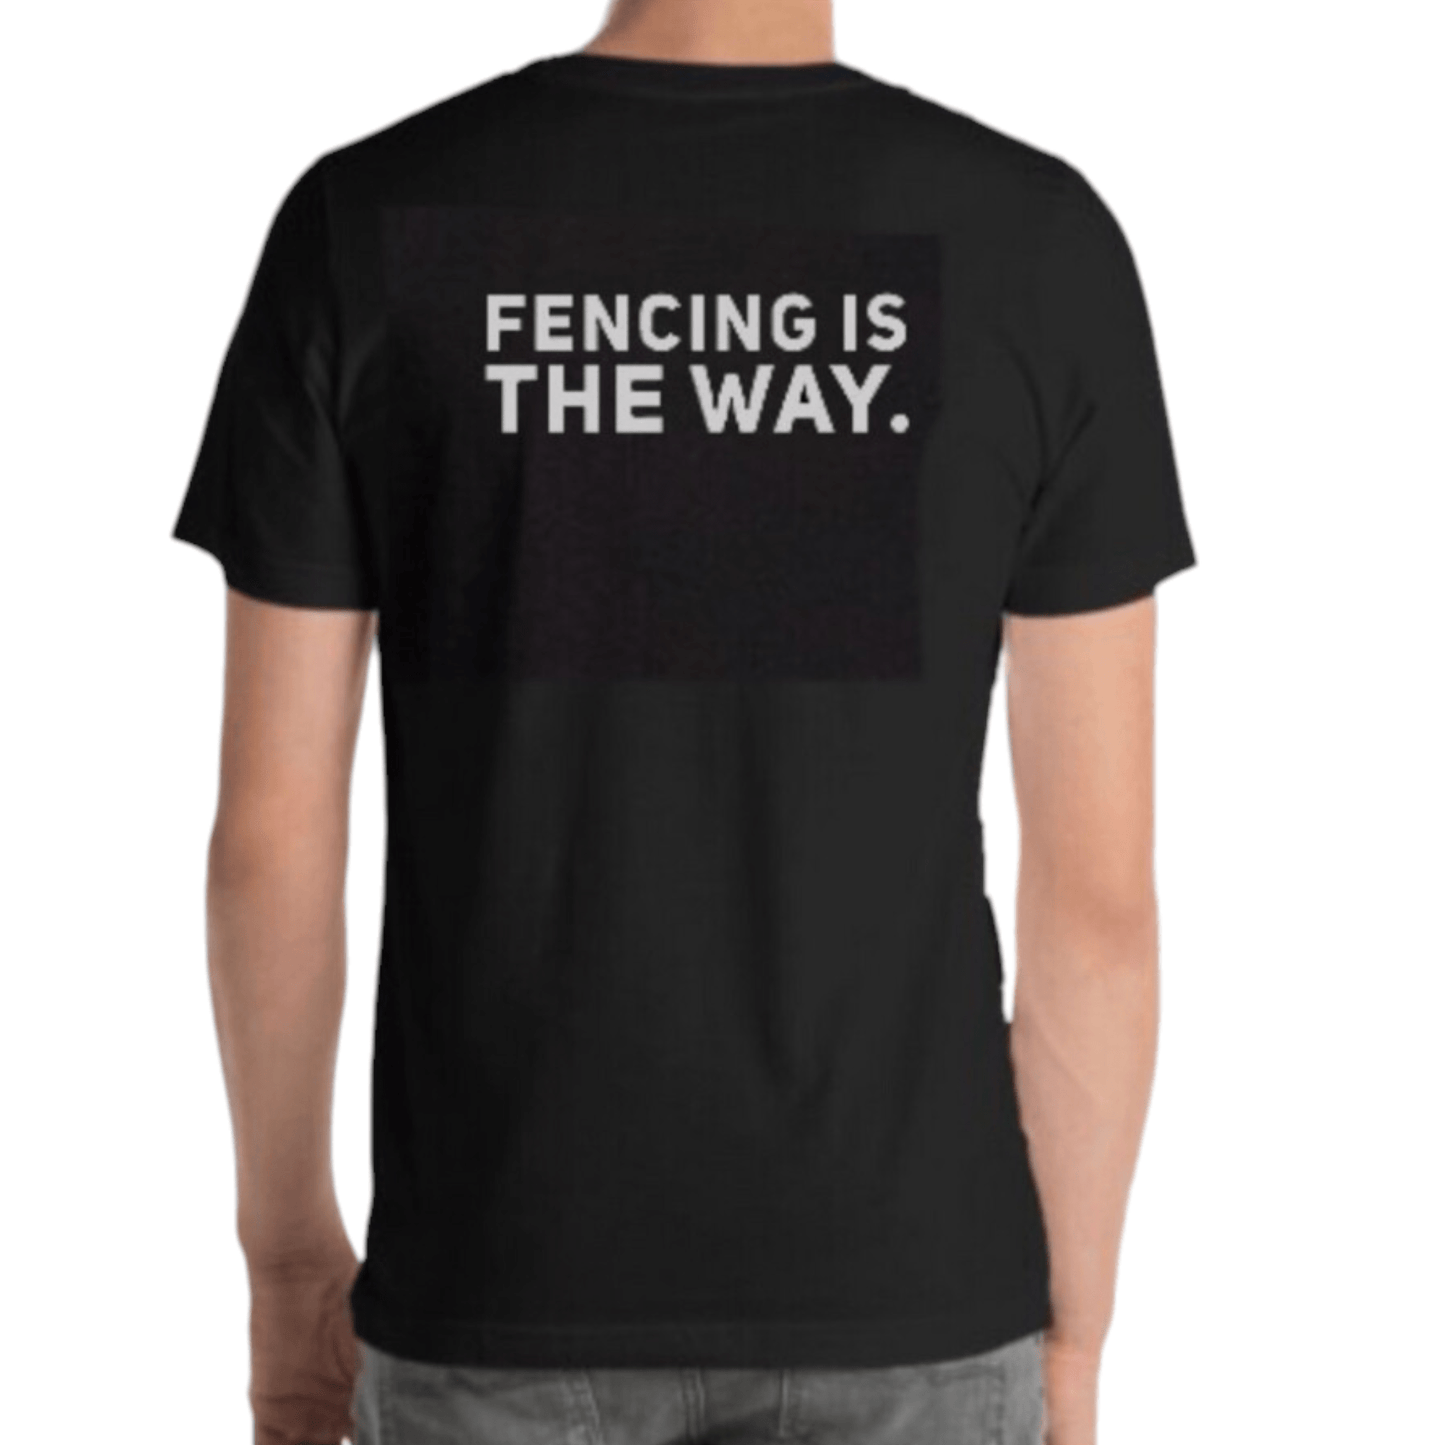 Fencing is the Way Children's T-Shirt